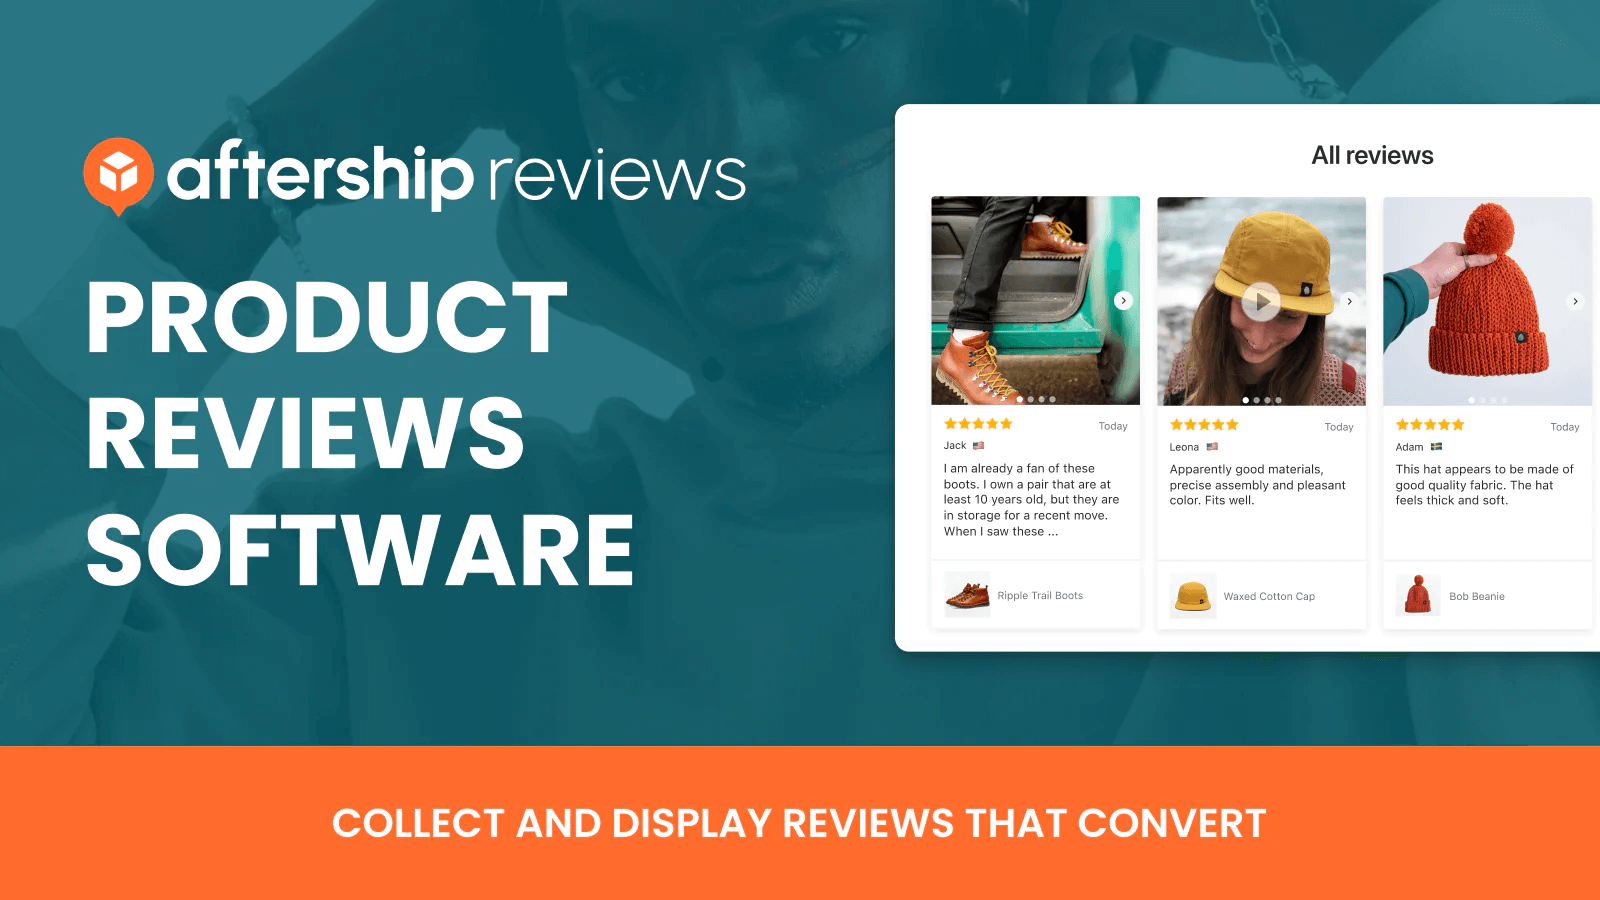 Automizely Product Reviews